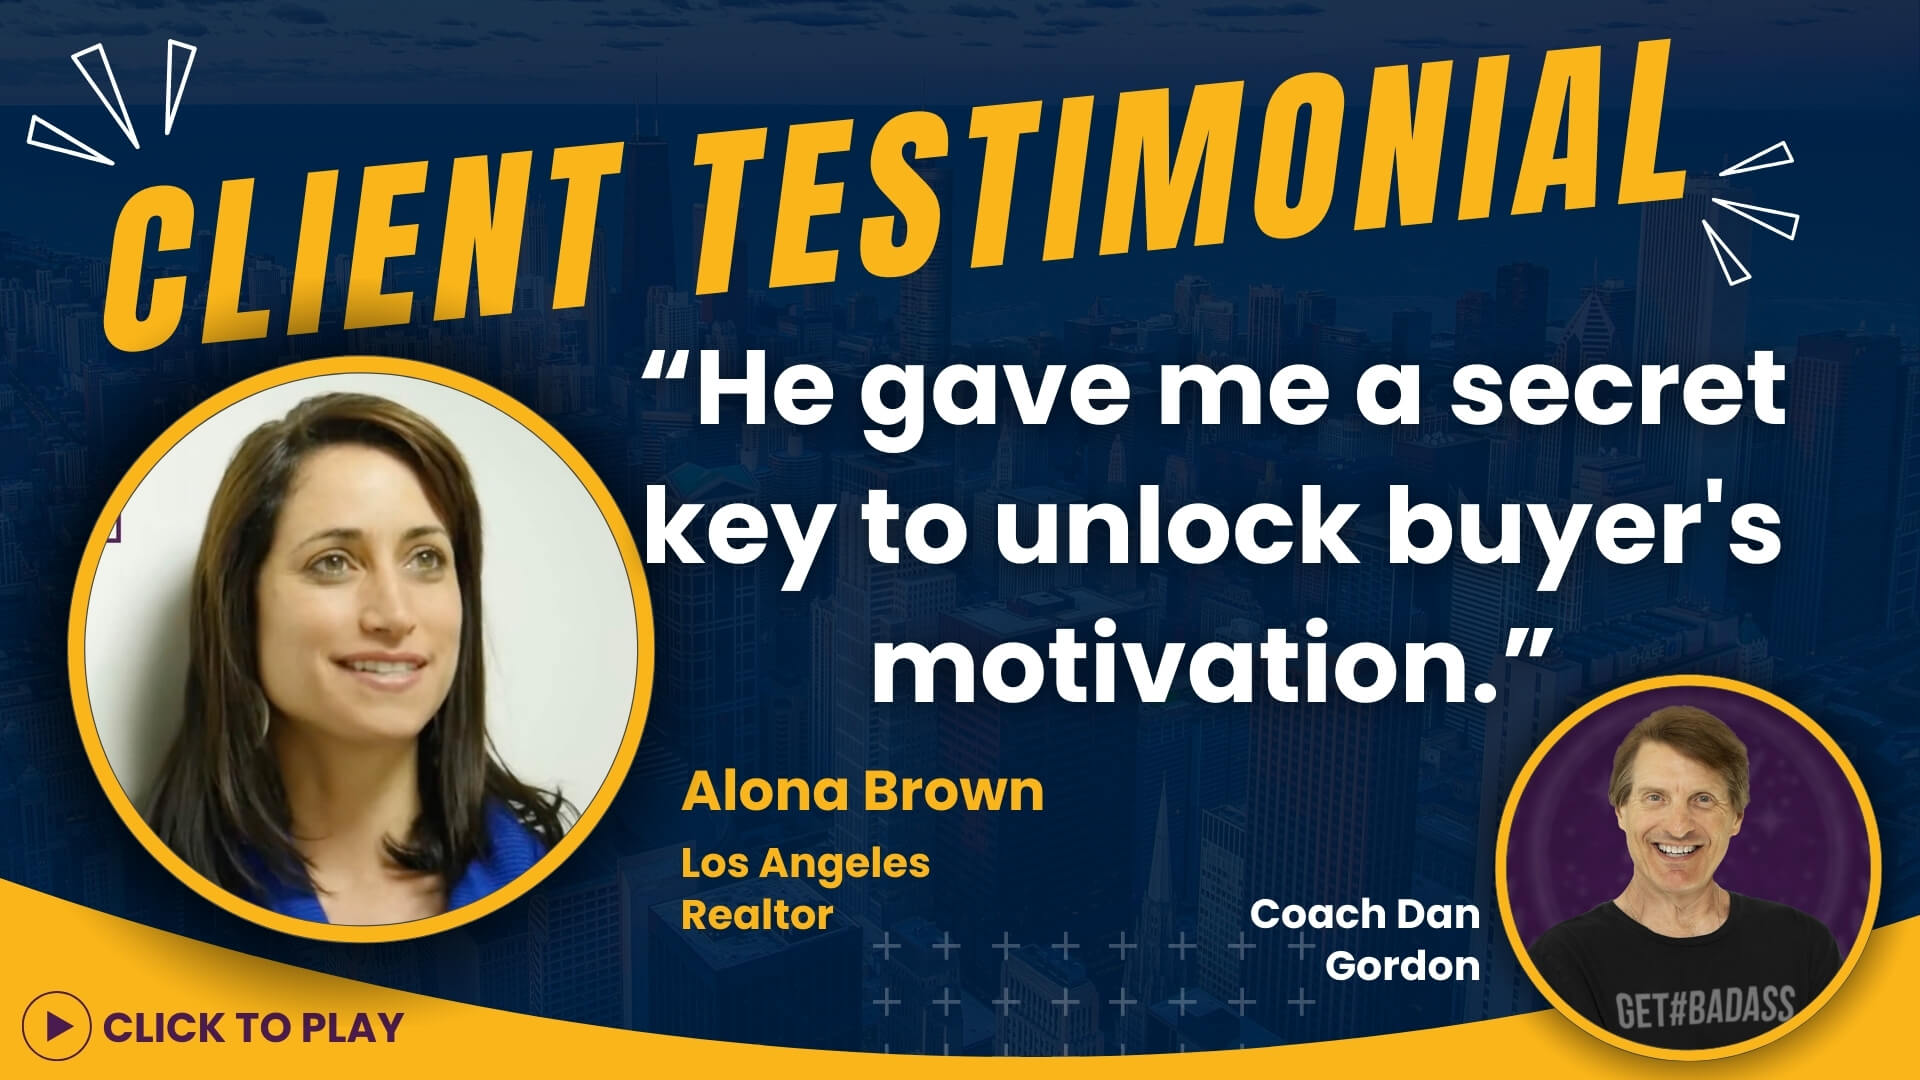 Los Angeles Realtor Alona Brown shares a positive review about Coach Dan Gordon, highlighting the discovery of a secret key to buyer motivation in her testimonial.